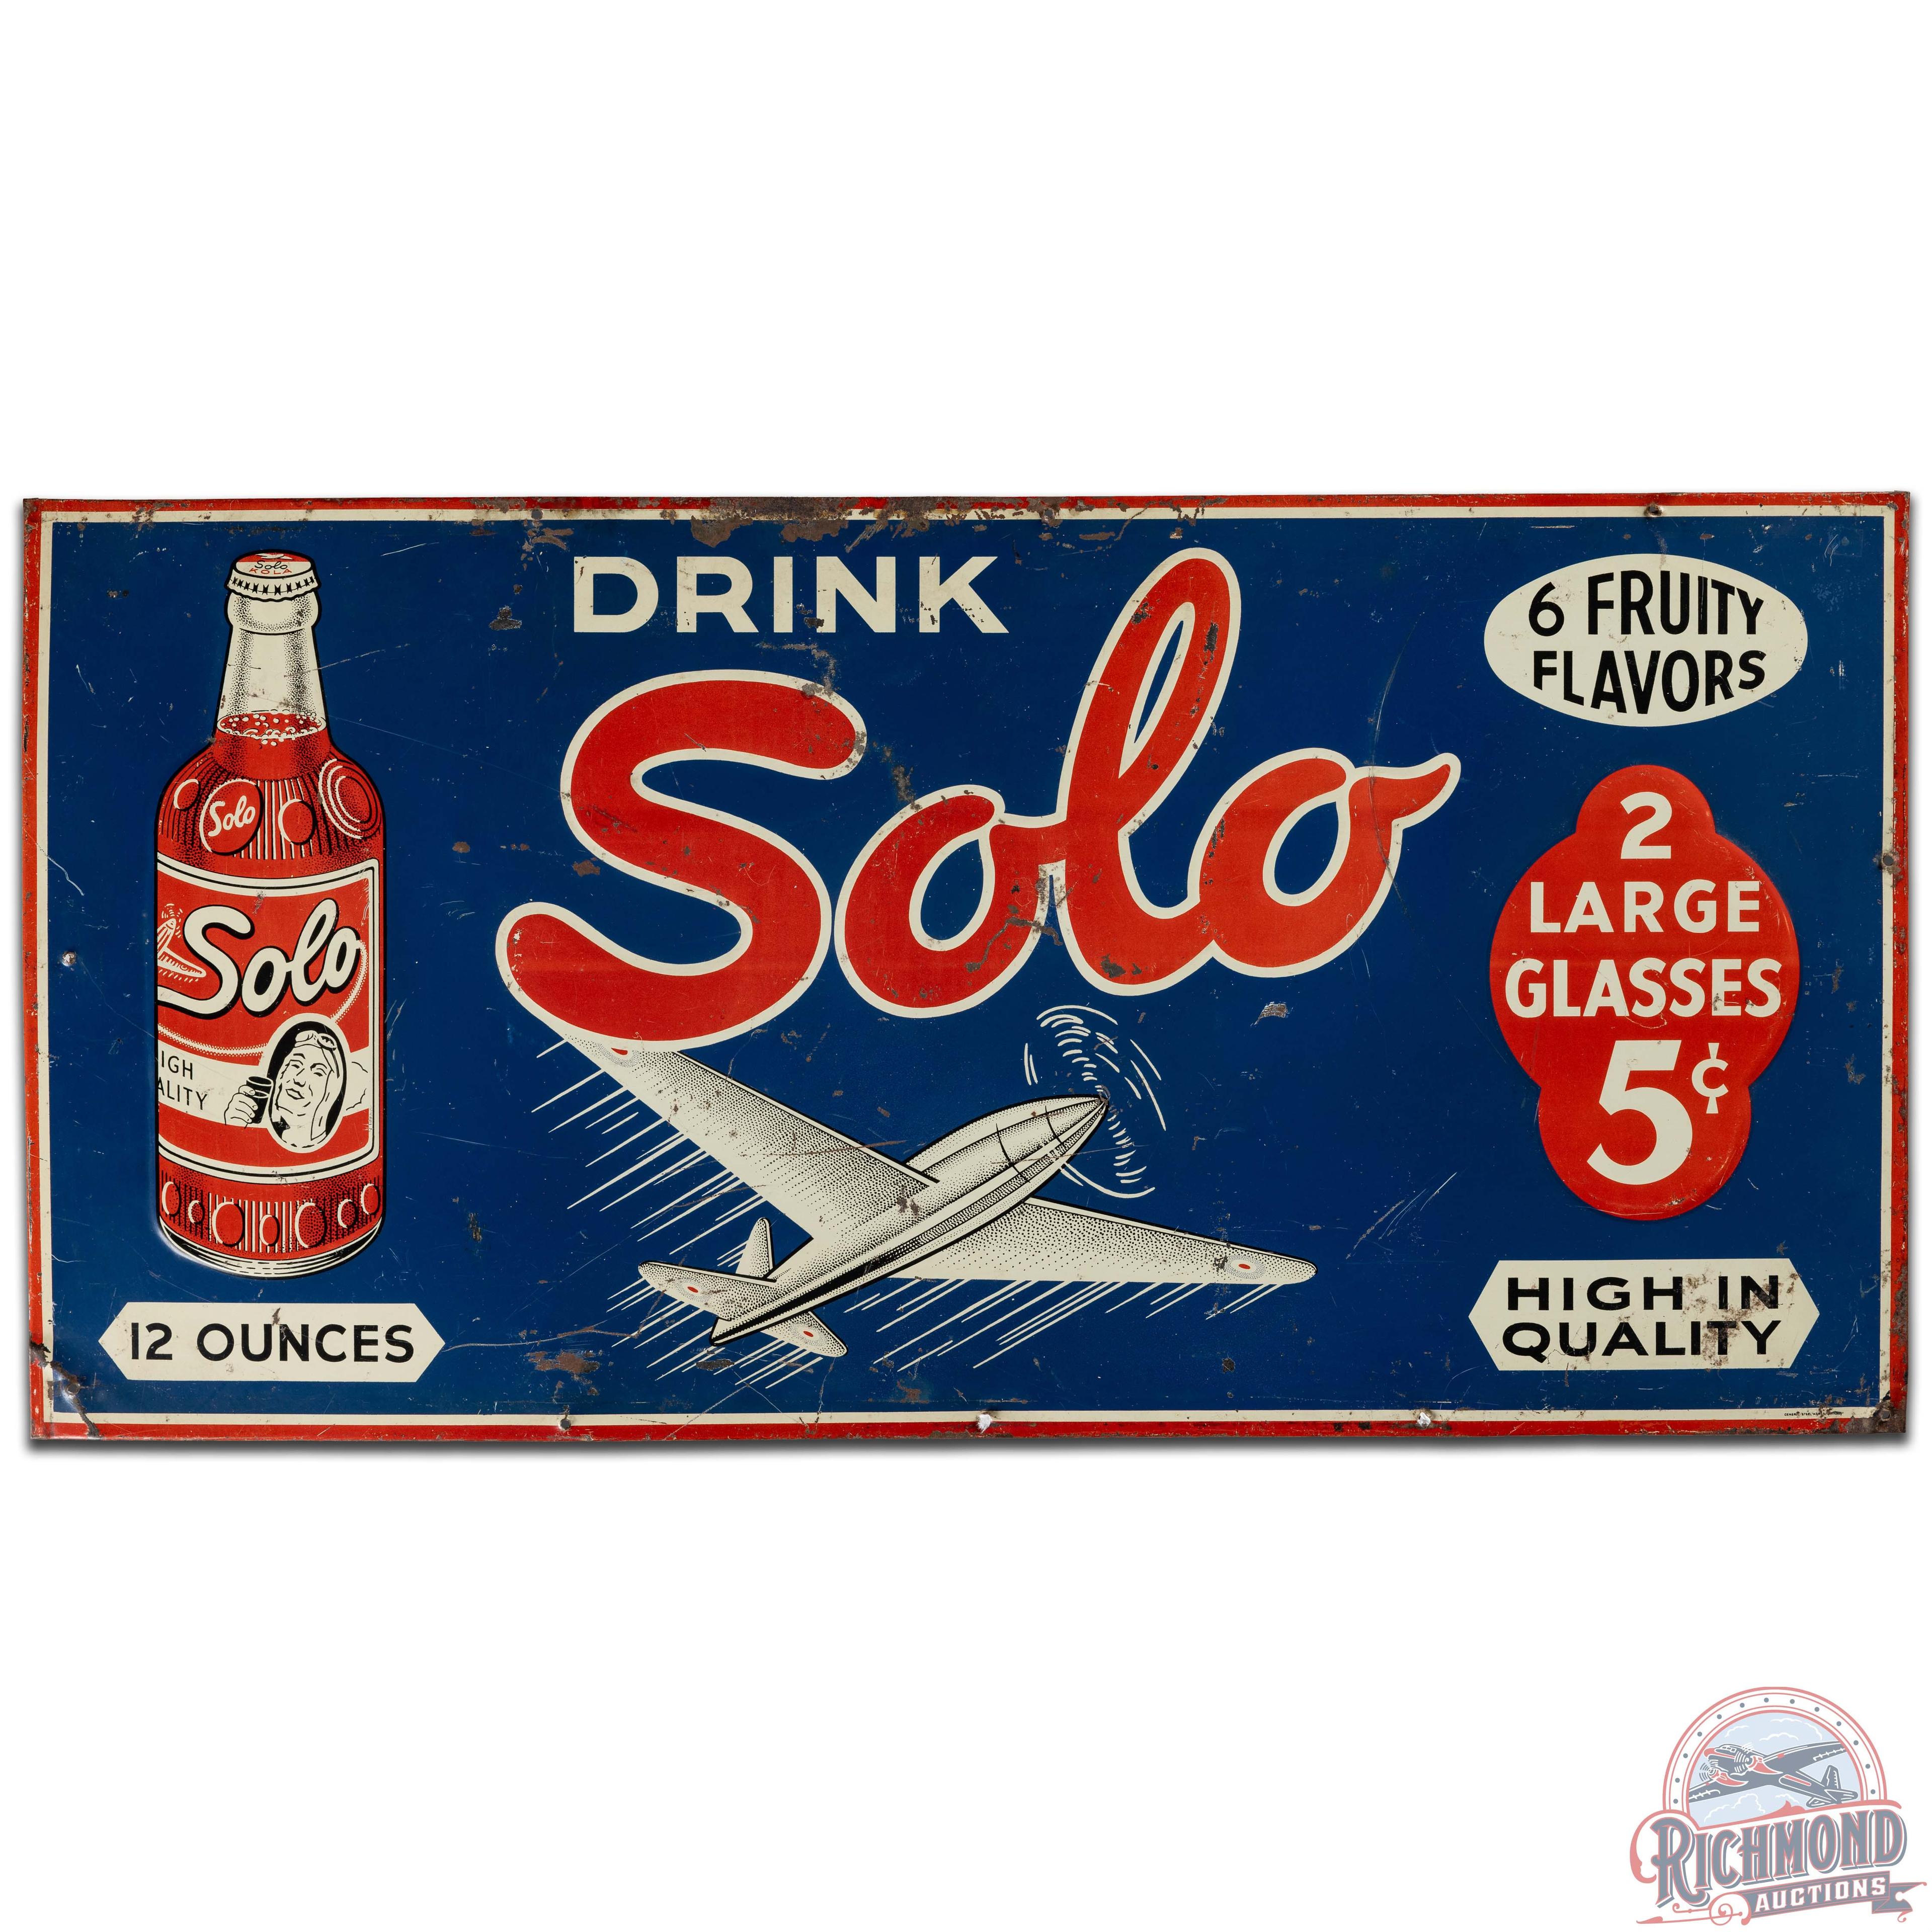 Drink Solo 6 Fruity Flavors SS Tin Sign w/ Plane & Bottle